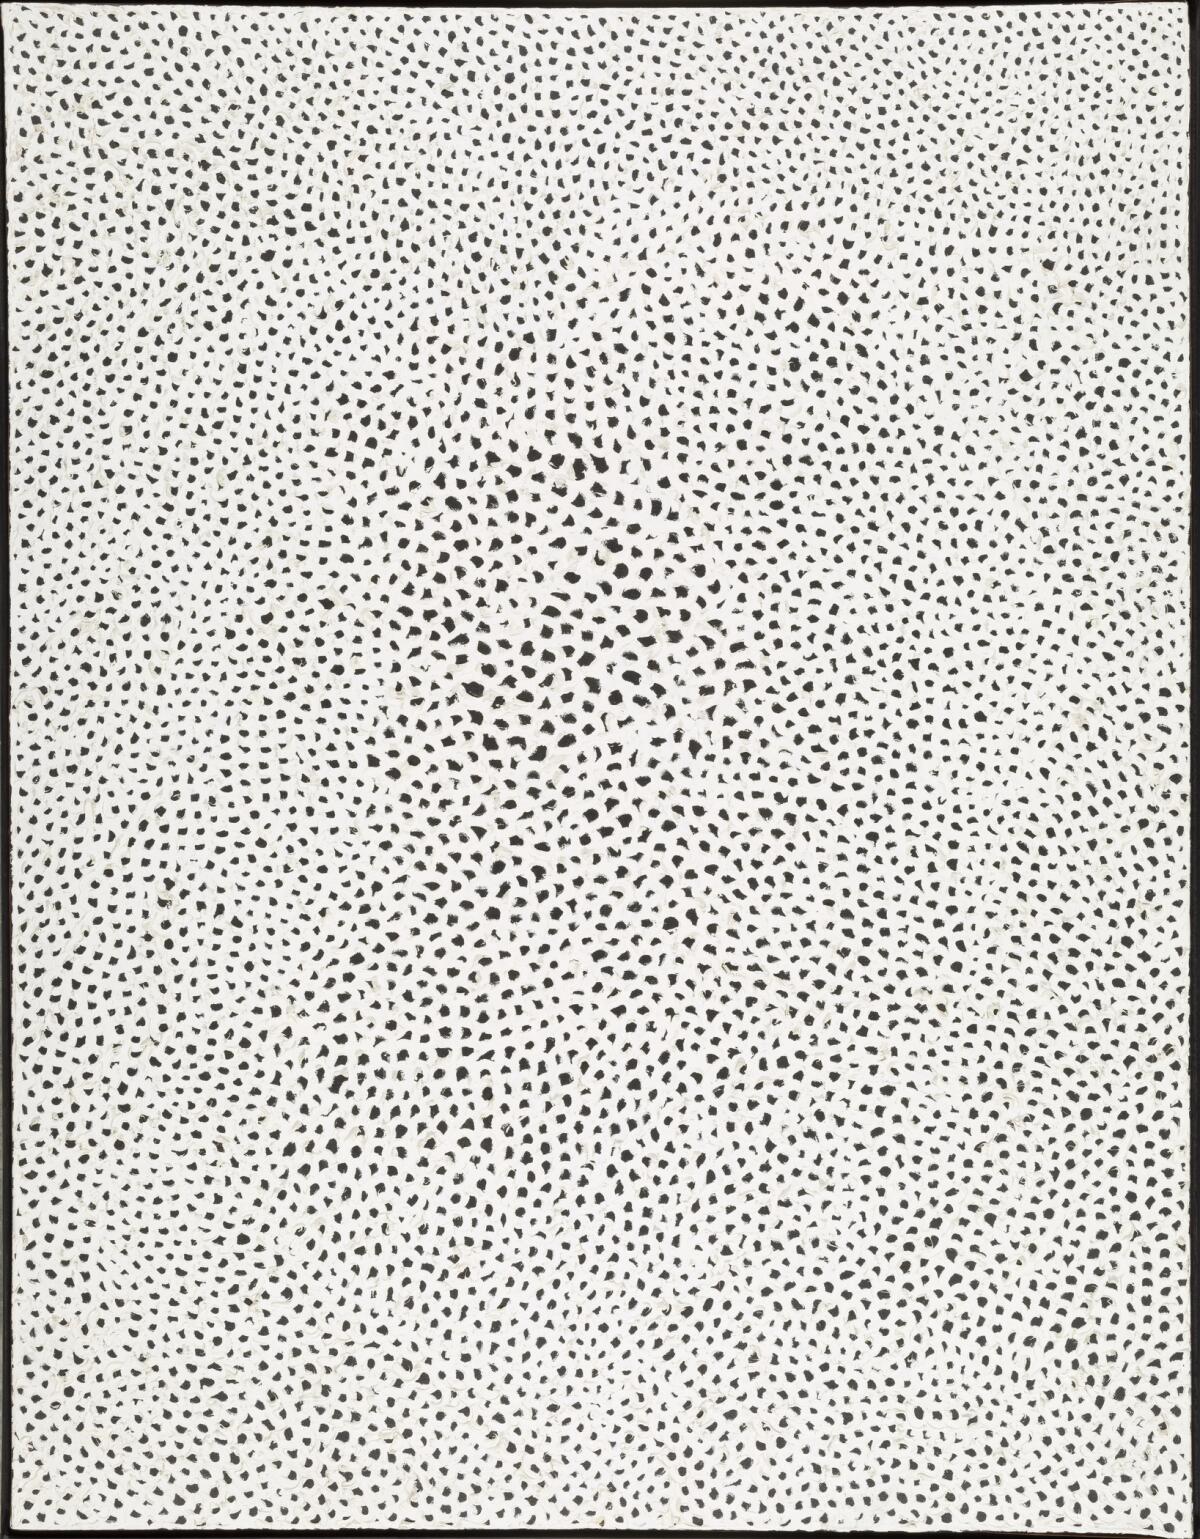 An oil painting of black polka dots on a white canvas.